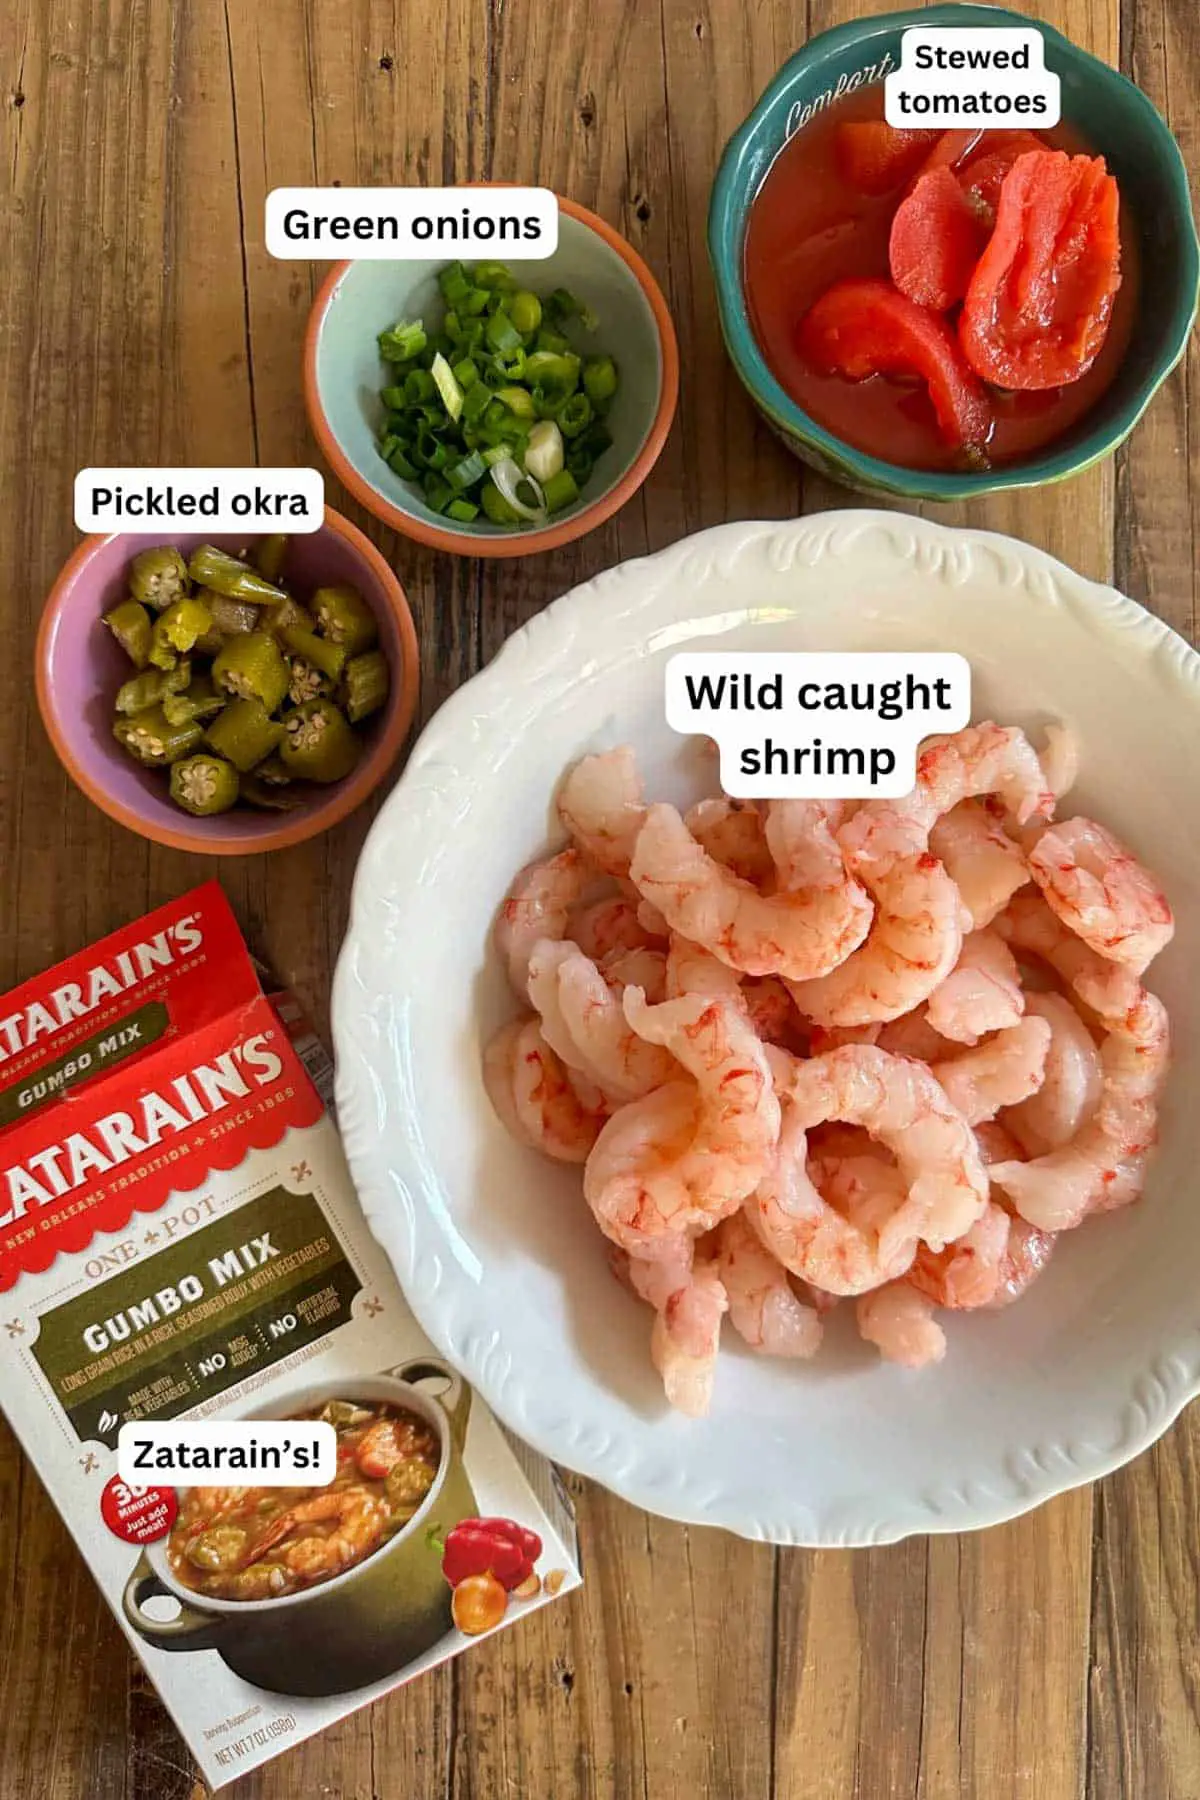 Ingredients for Zatarain's Shrimp Gumbo including a box of Zatarain's Gumbo Mix, and bowls containing wild caught shrimp, sliced pickled okra, sliced green onions, and stewed tomatoes.